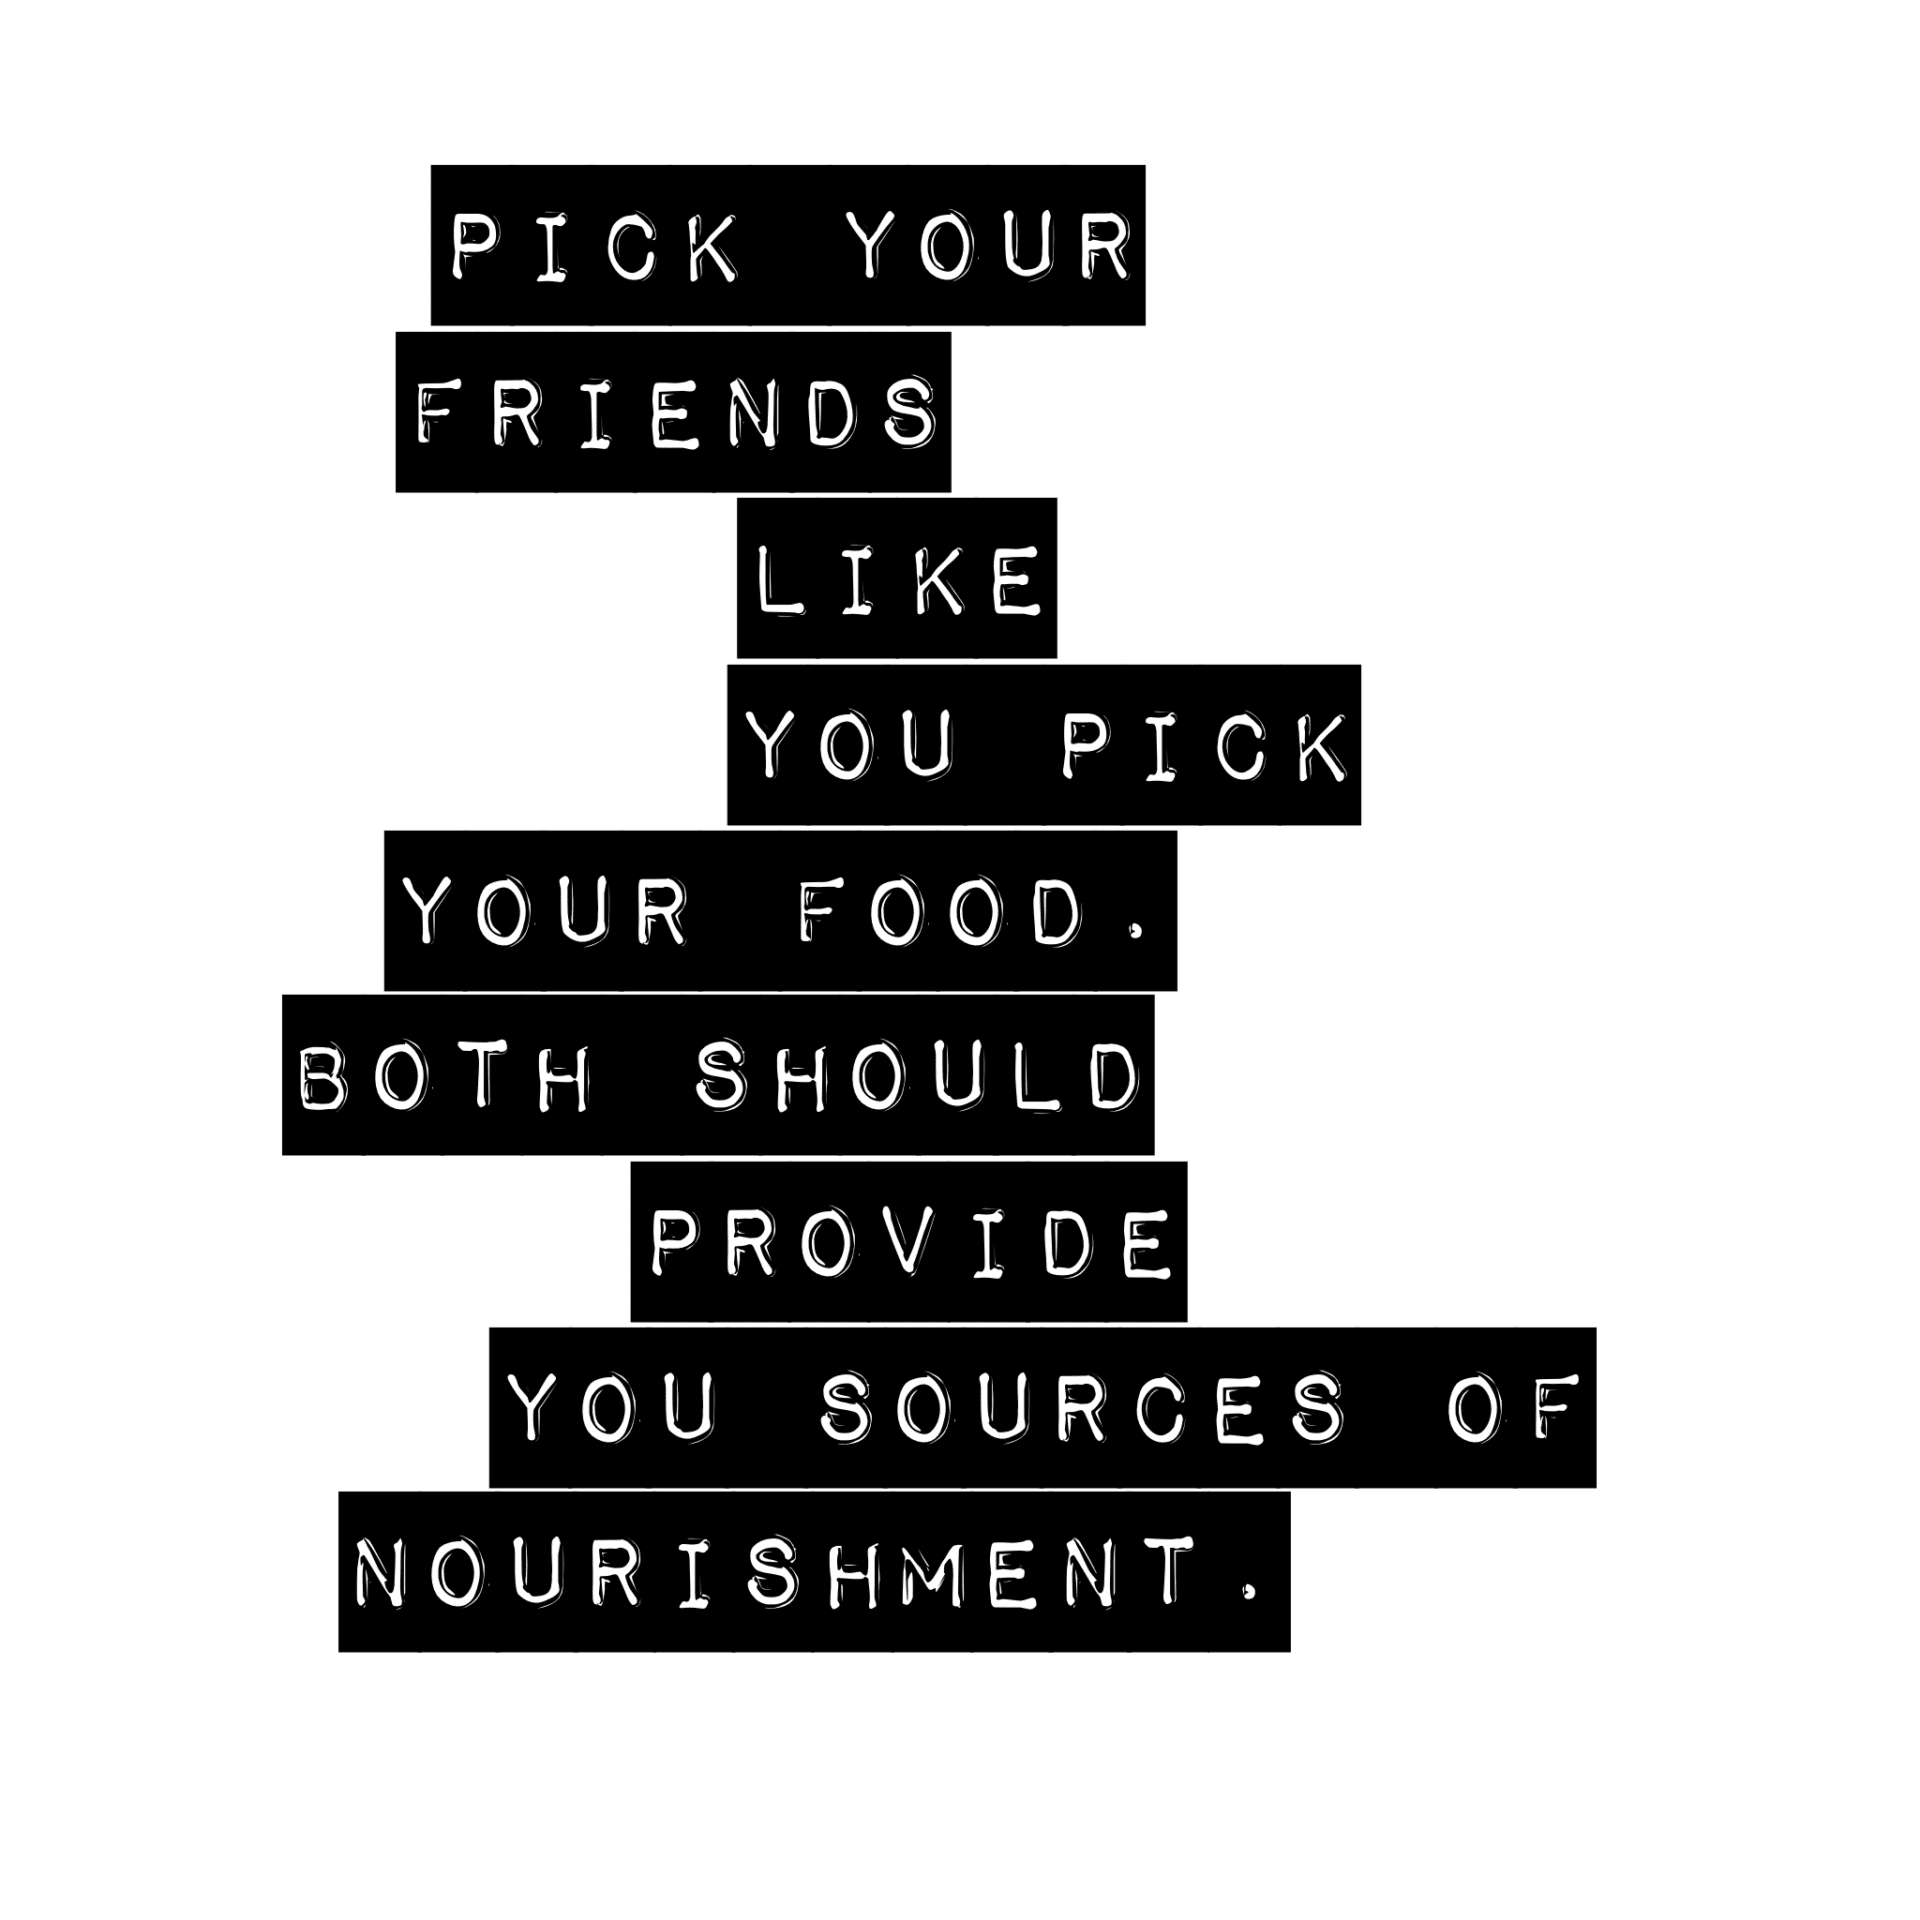 Friendship Expirations | Pick Your Friends Like You Pick Your Food